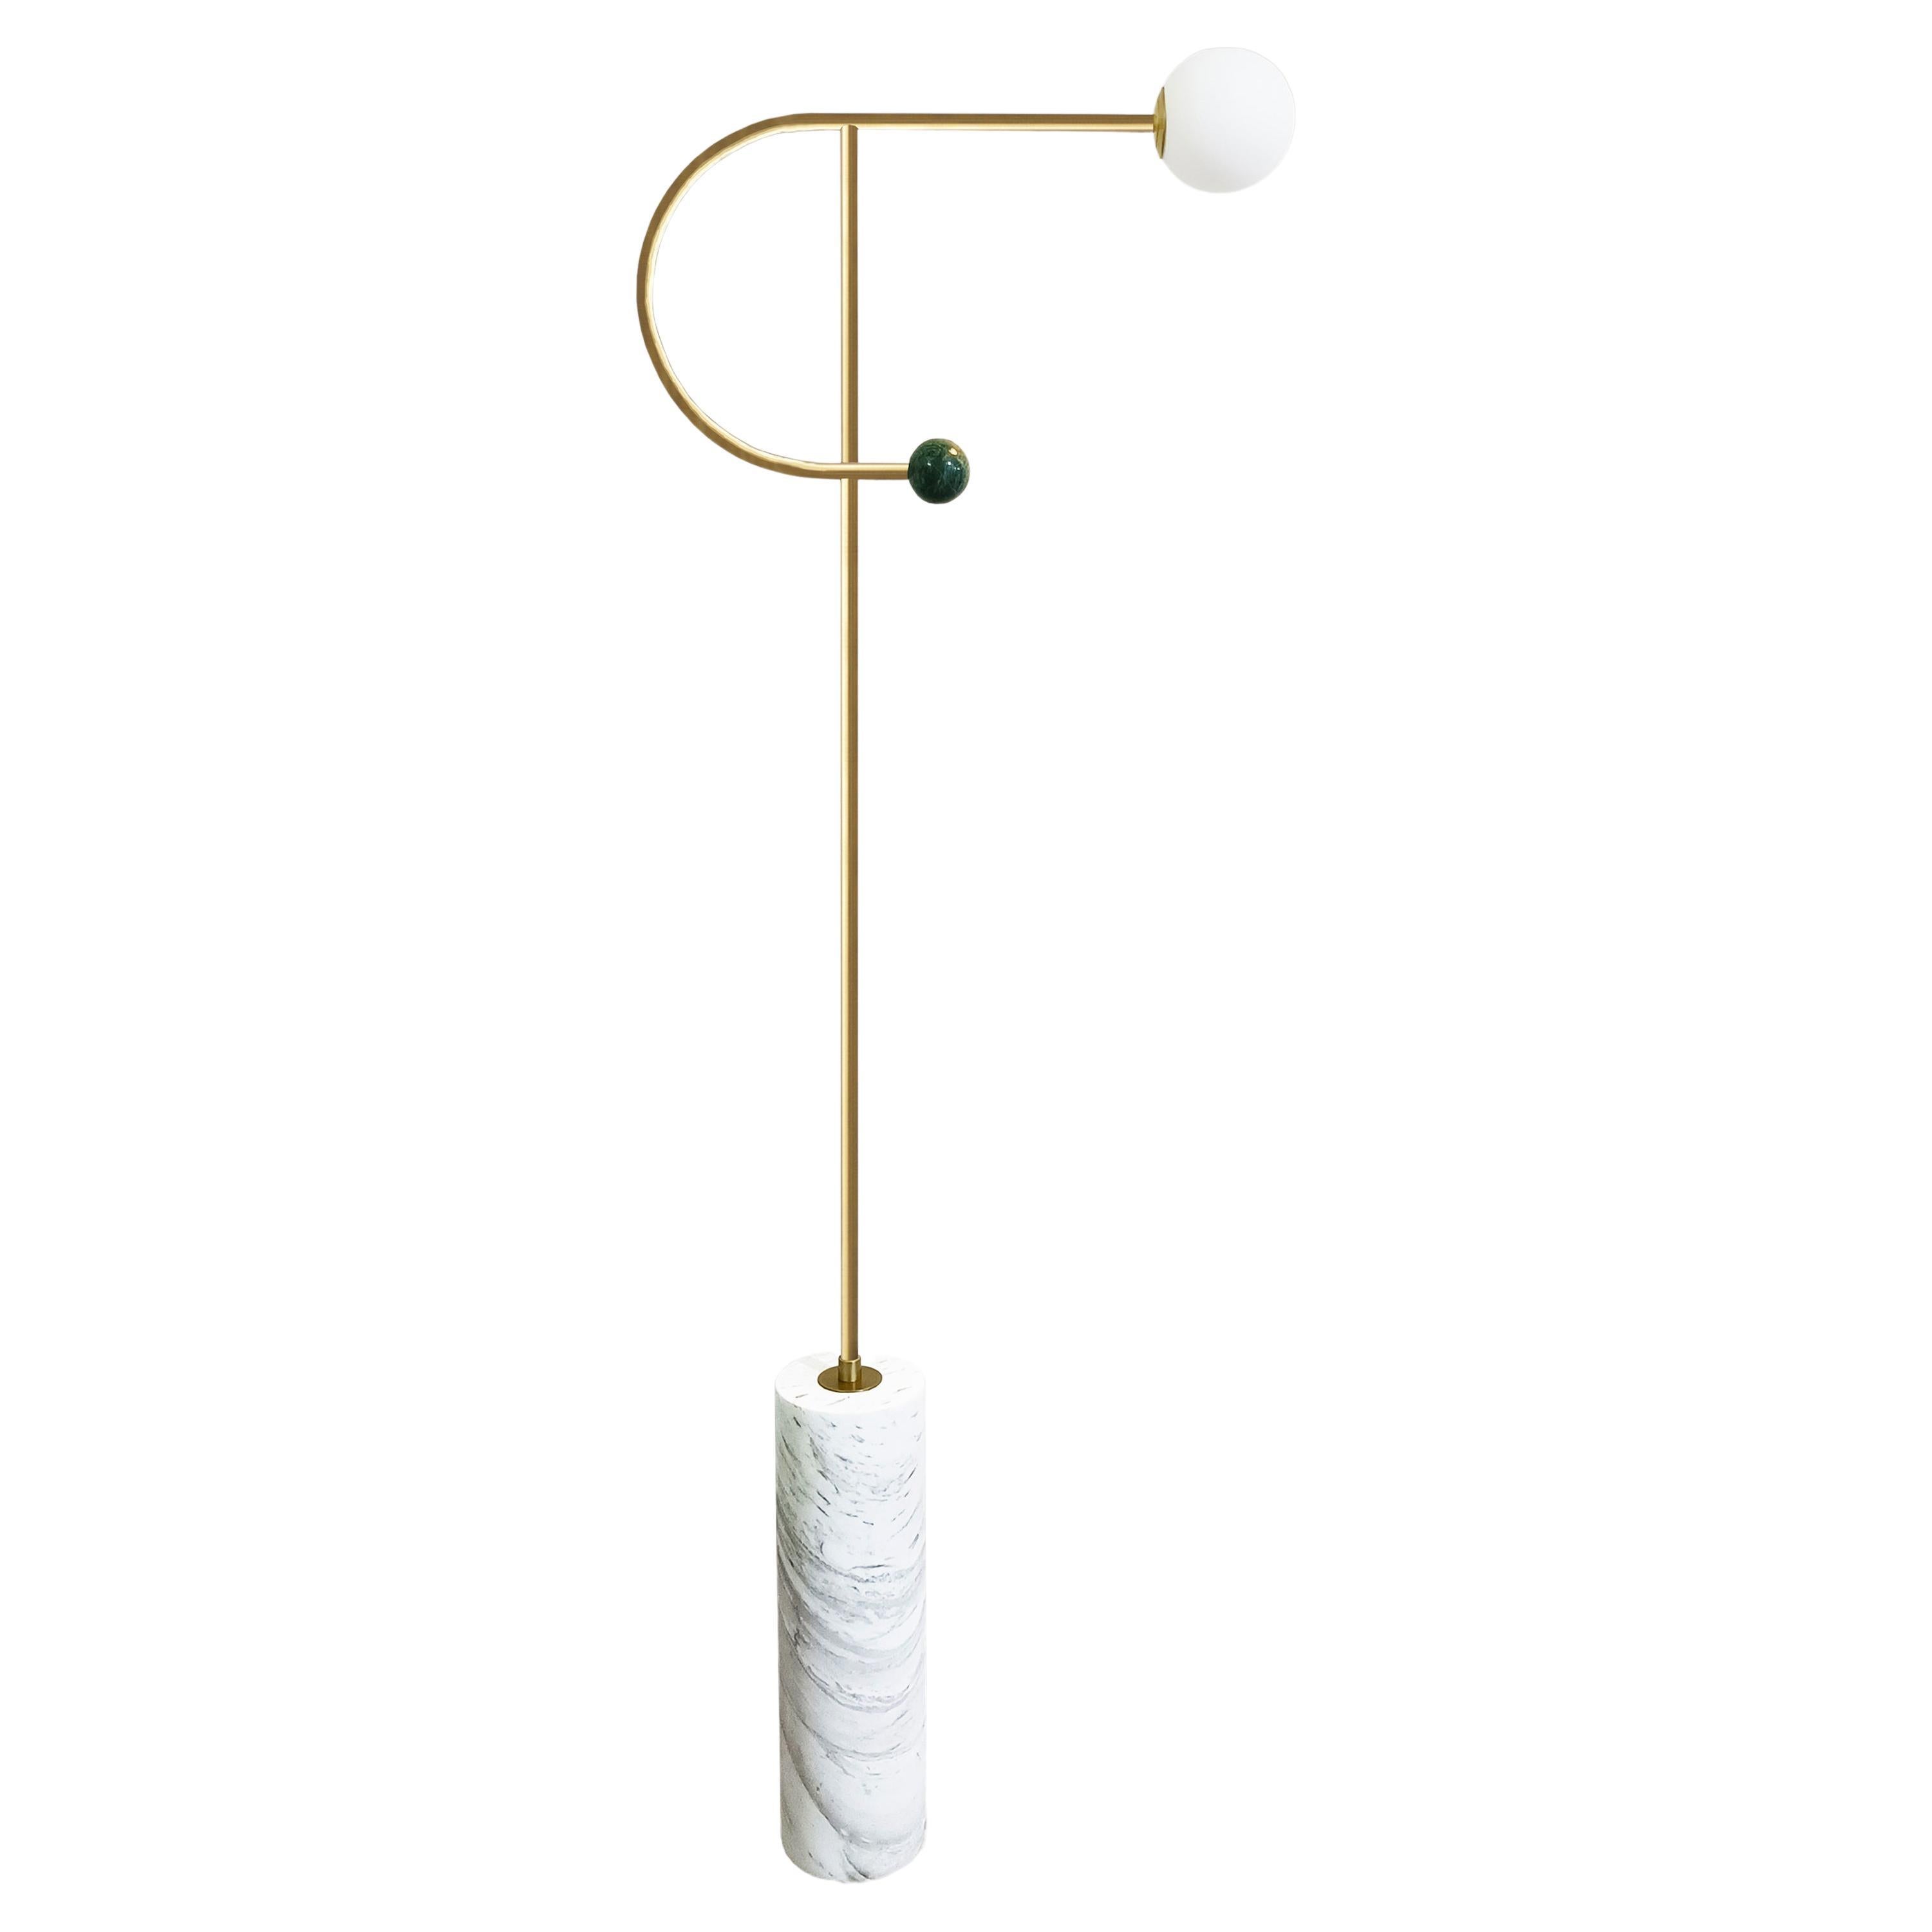 Orb 2 Floor Lamp by Square in Circle